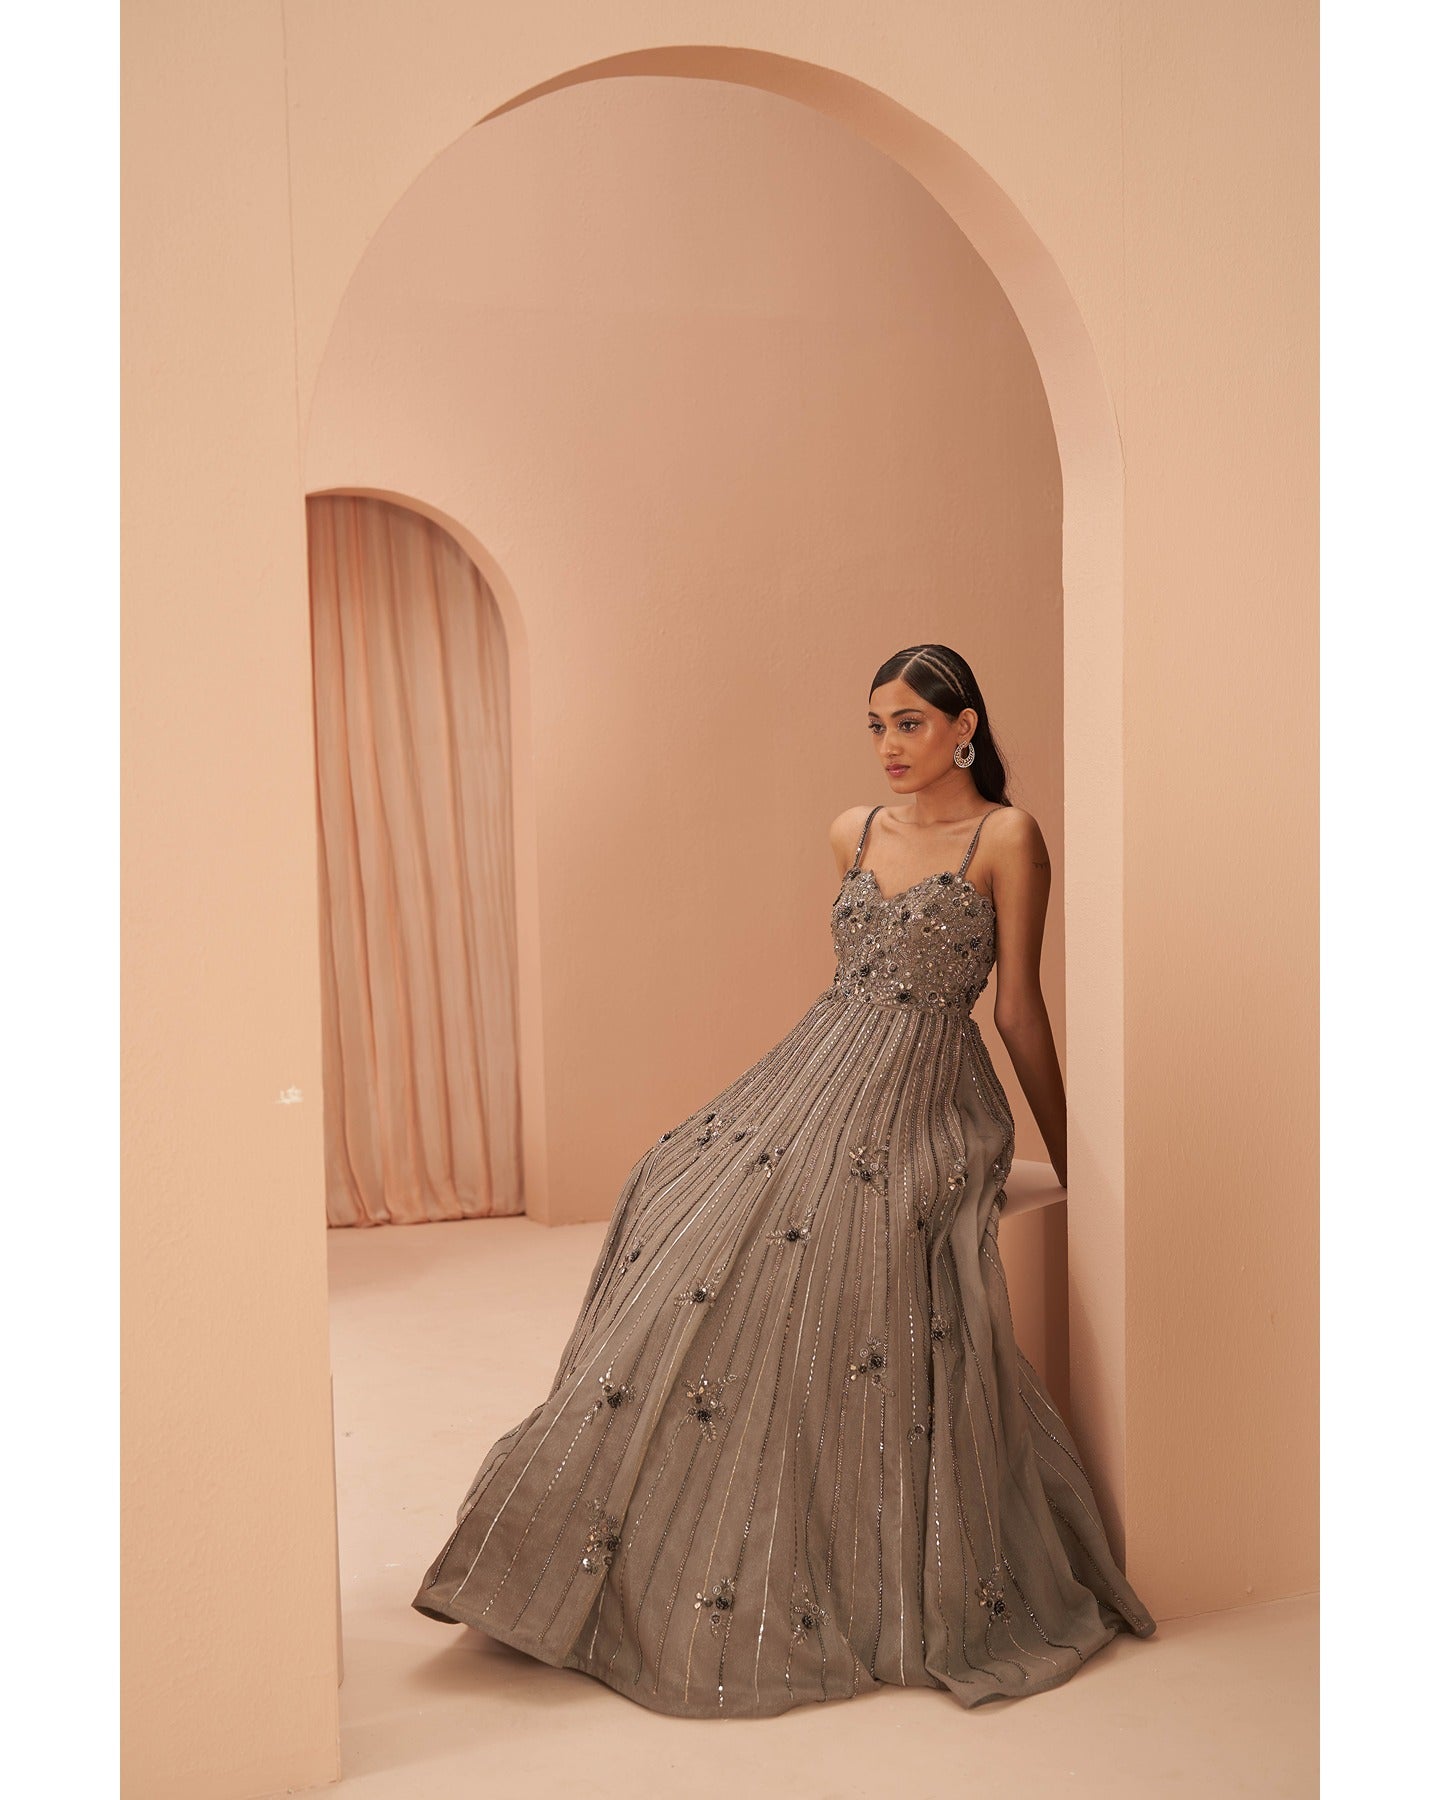 Sophisticated Taupe: Hand-embroidered allure graces this gown, a perfect blend of elegance and timeless charm. 